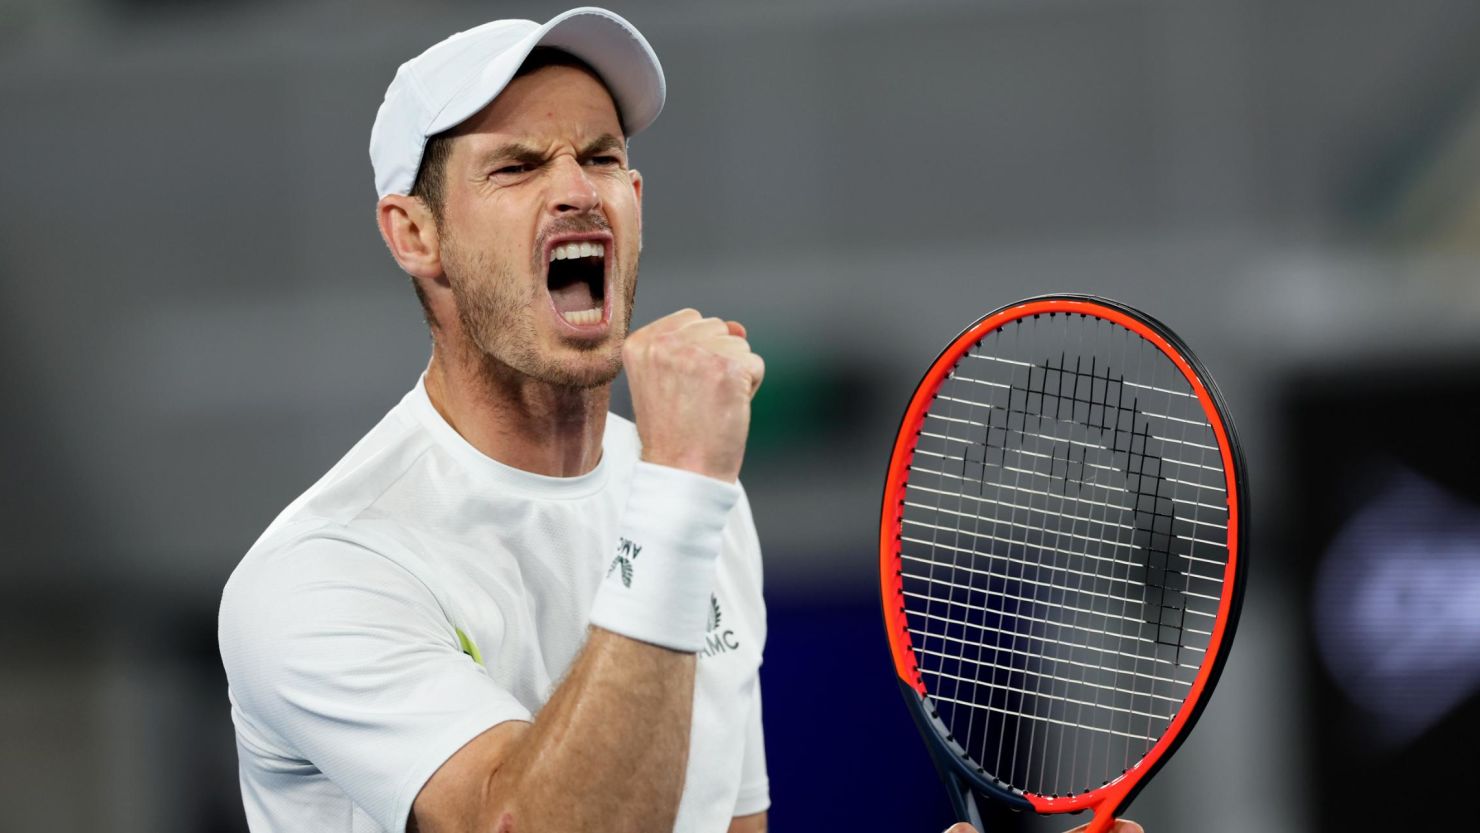 Paris Olympics: Andy Murray Withdraws From Men’s Singles Tennis